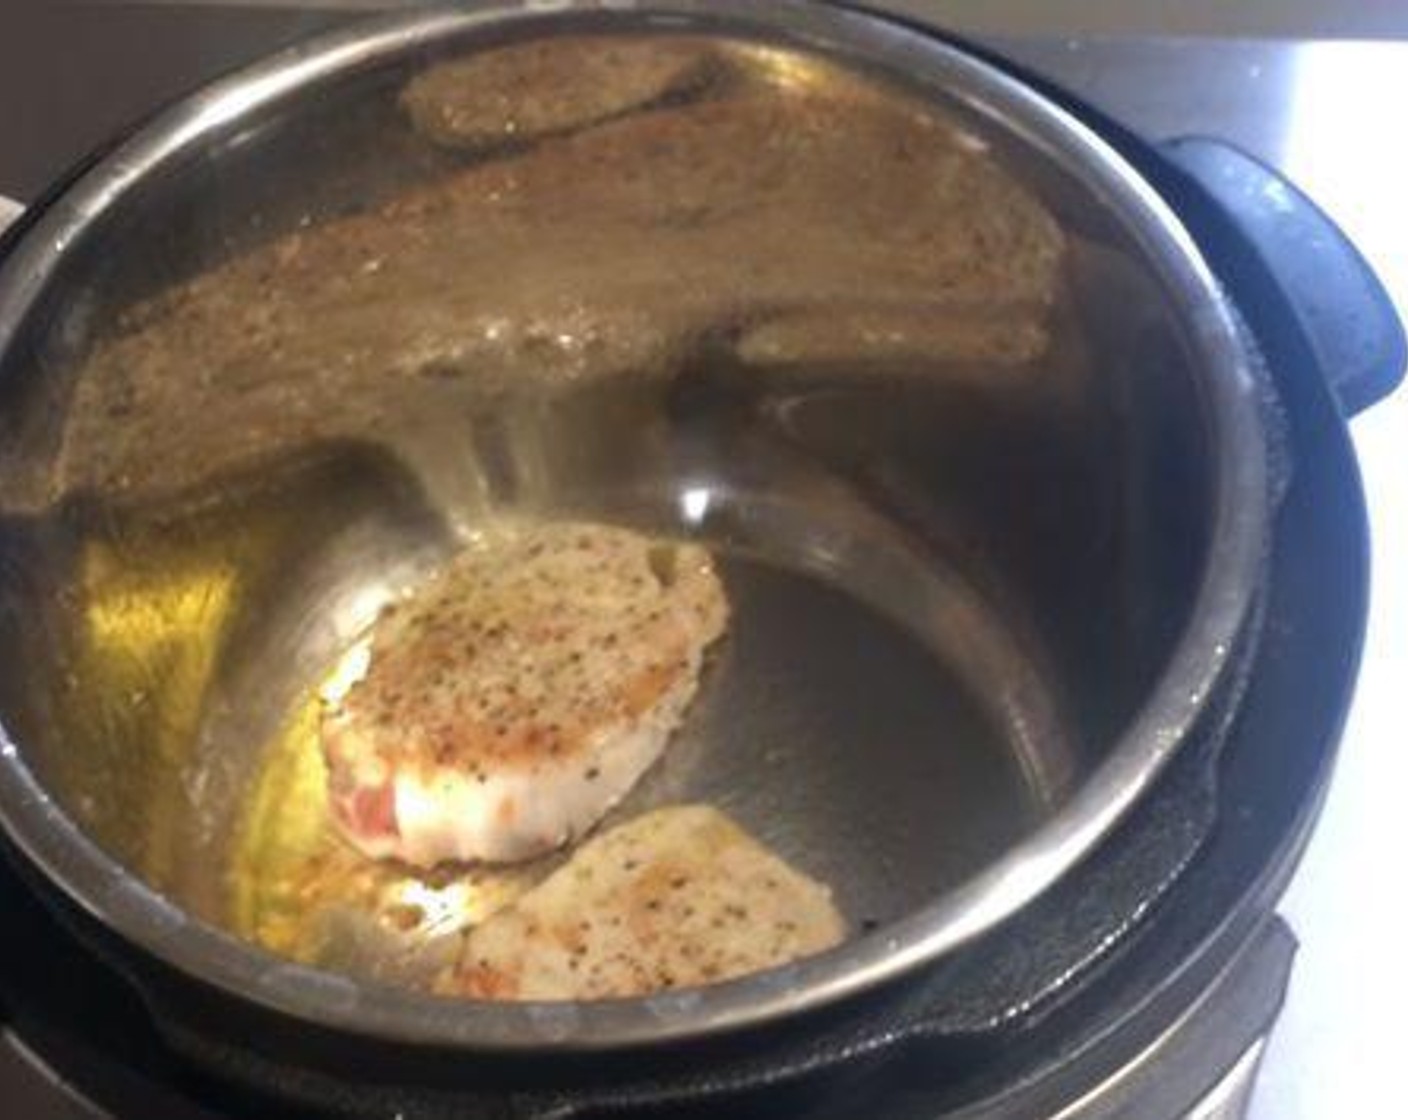 step 3 Heat up some Olive Oil (1 Tbsp) in your pressure cooker. Then cook your pork chops for about a minute on each side.